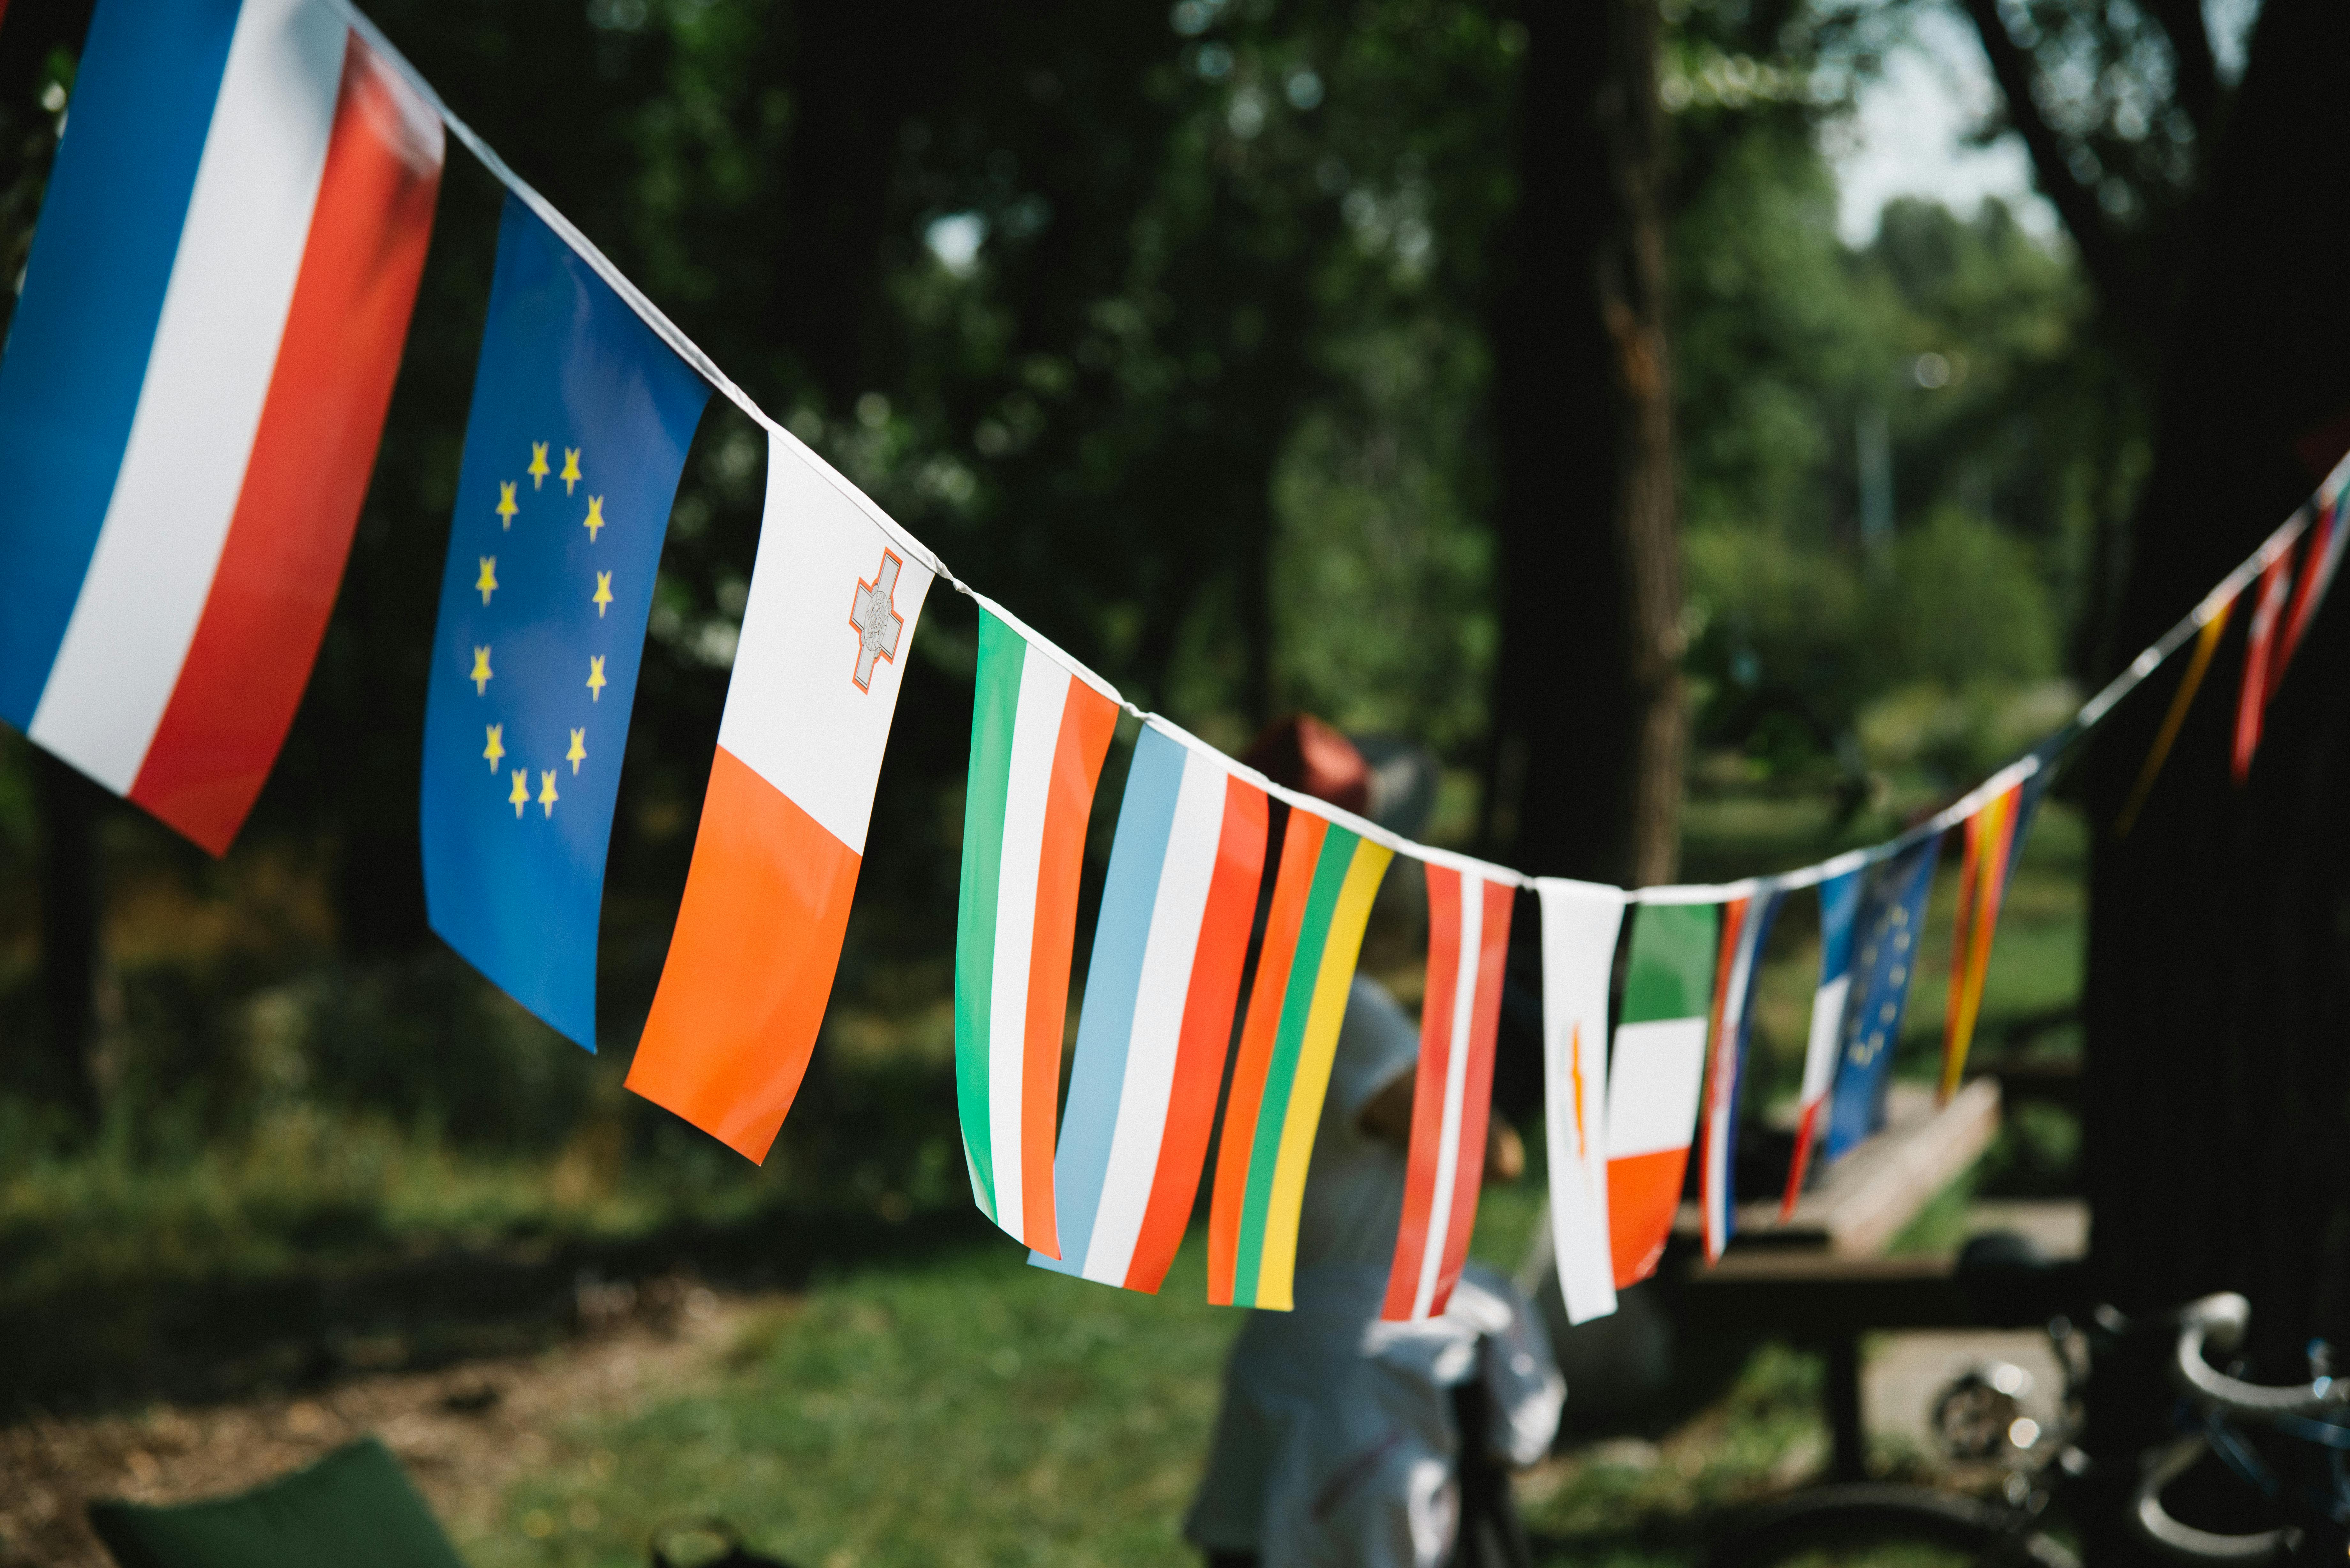 In the picture - a garland of flags of various countries and the European Union